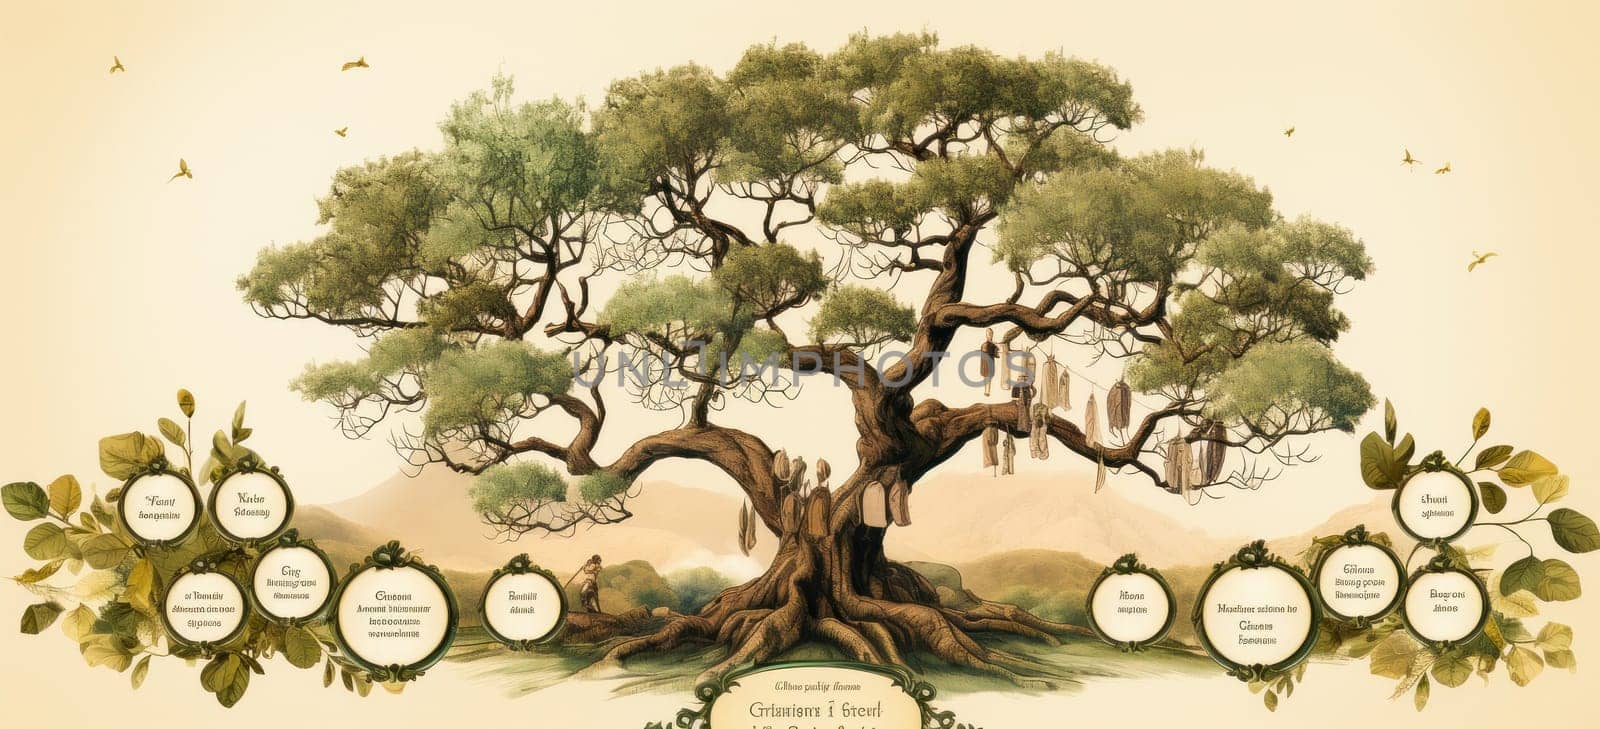 Unique family tree greeting card template by Yurich32